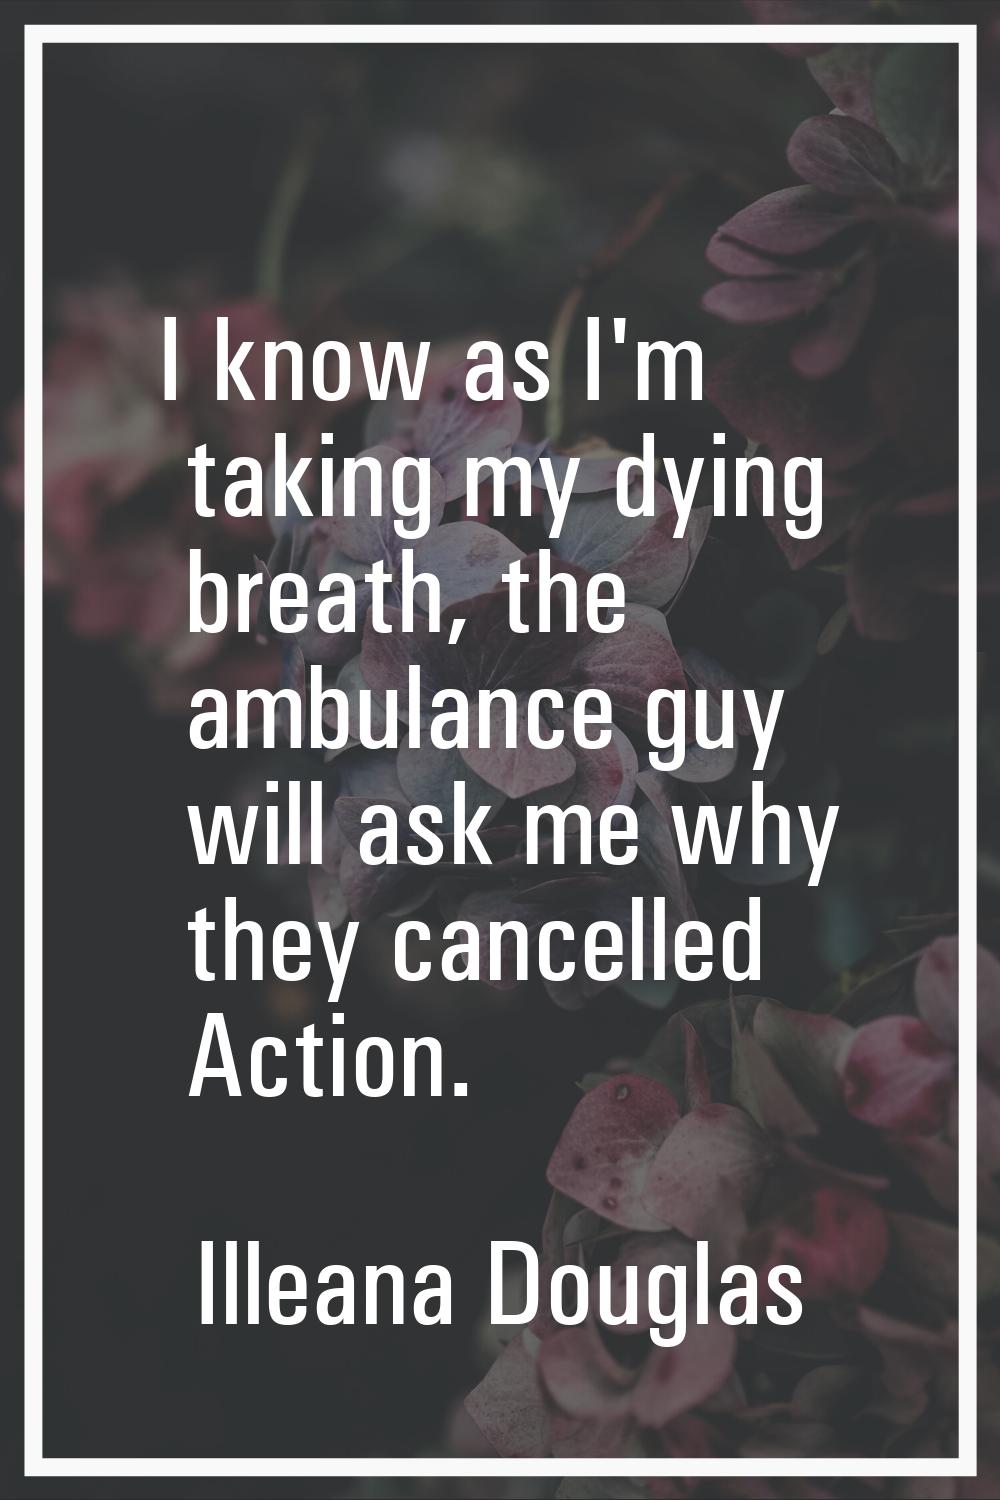 I know as I'm taking my dying breath, the ambulance guy will ask me why they cancelled Action.